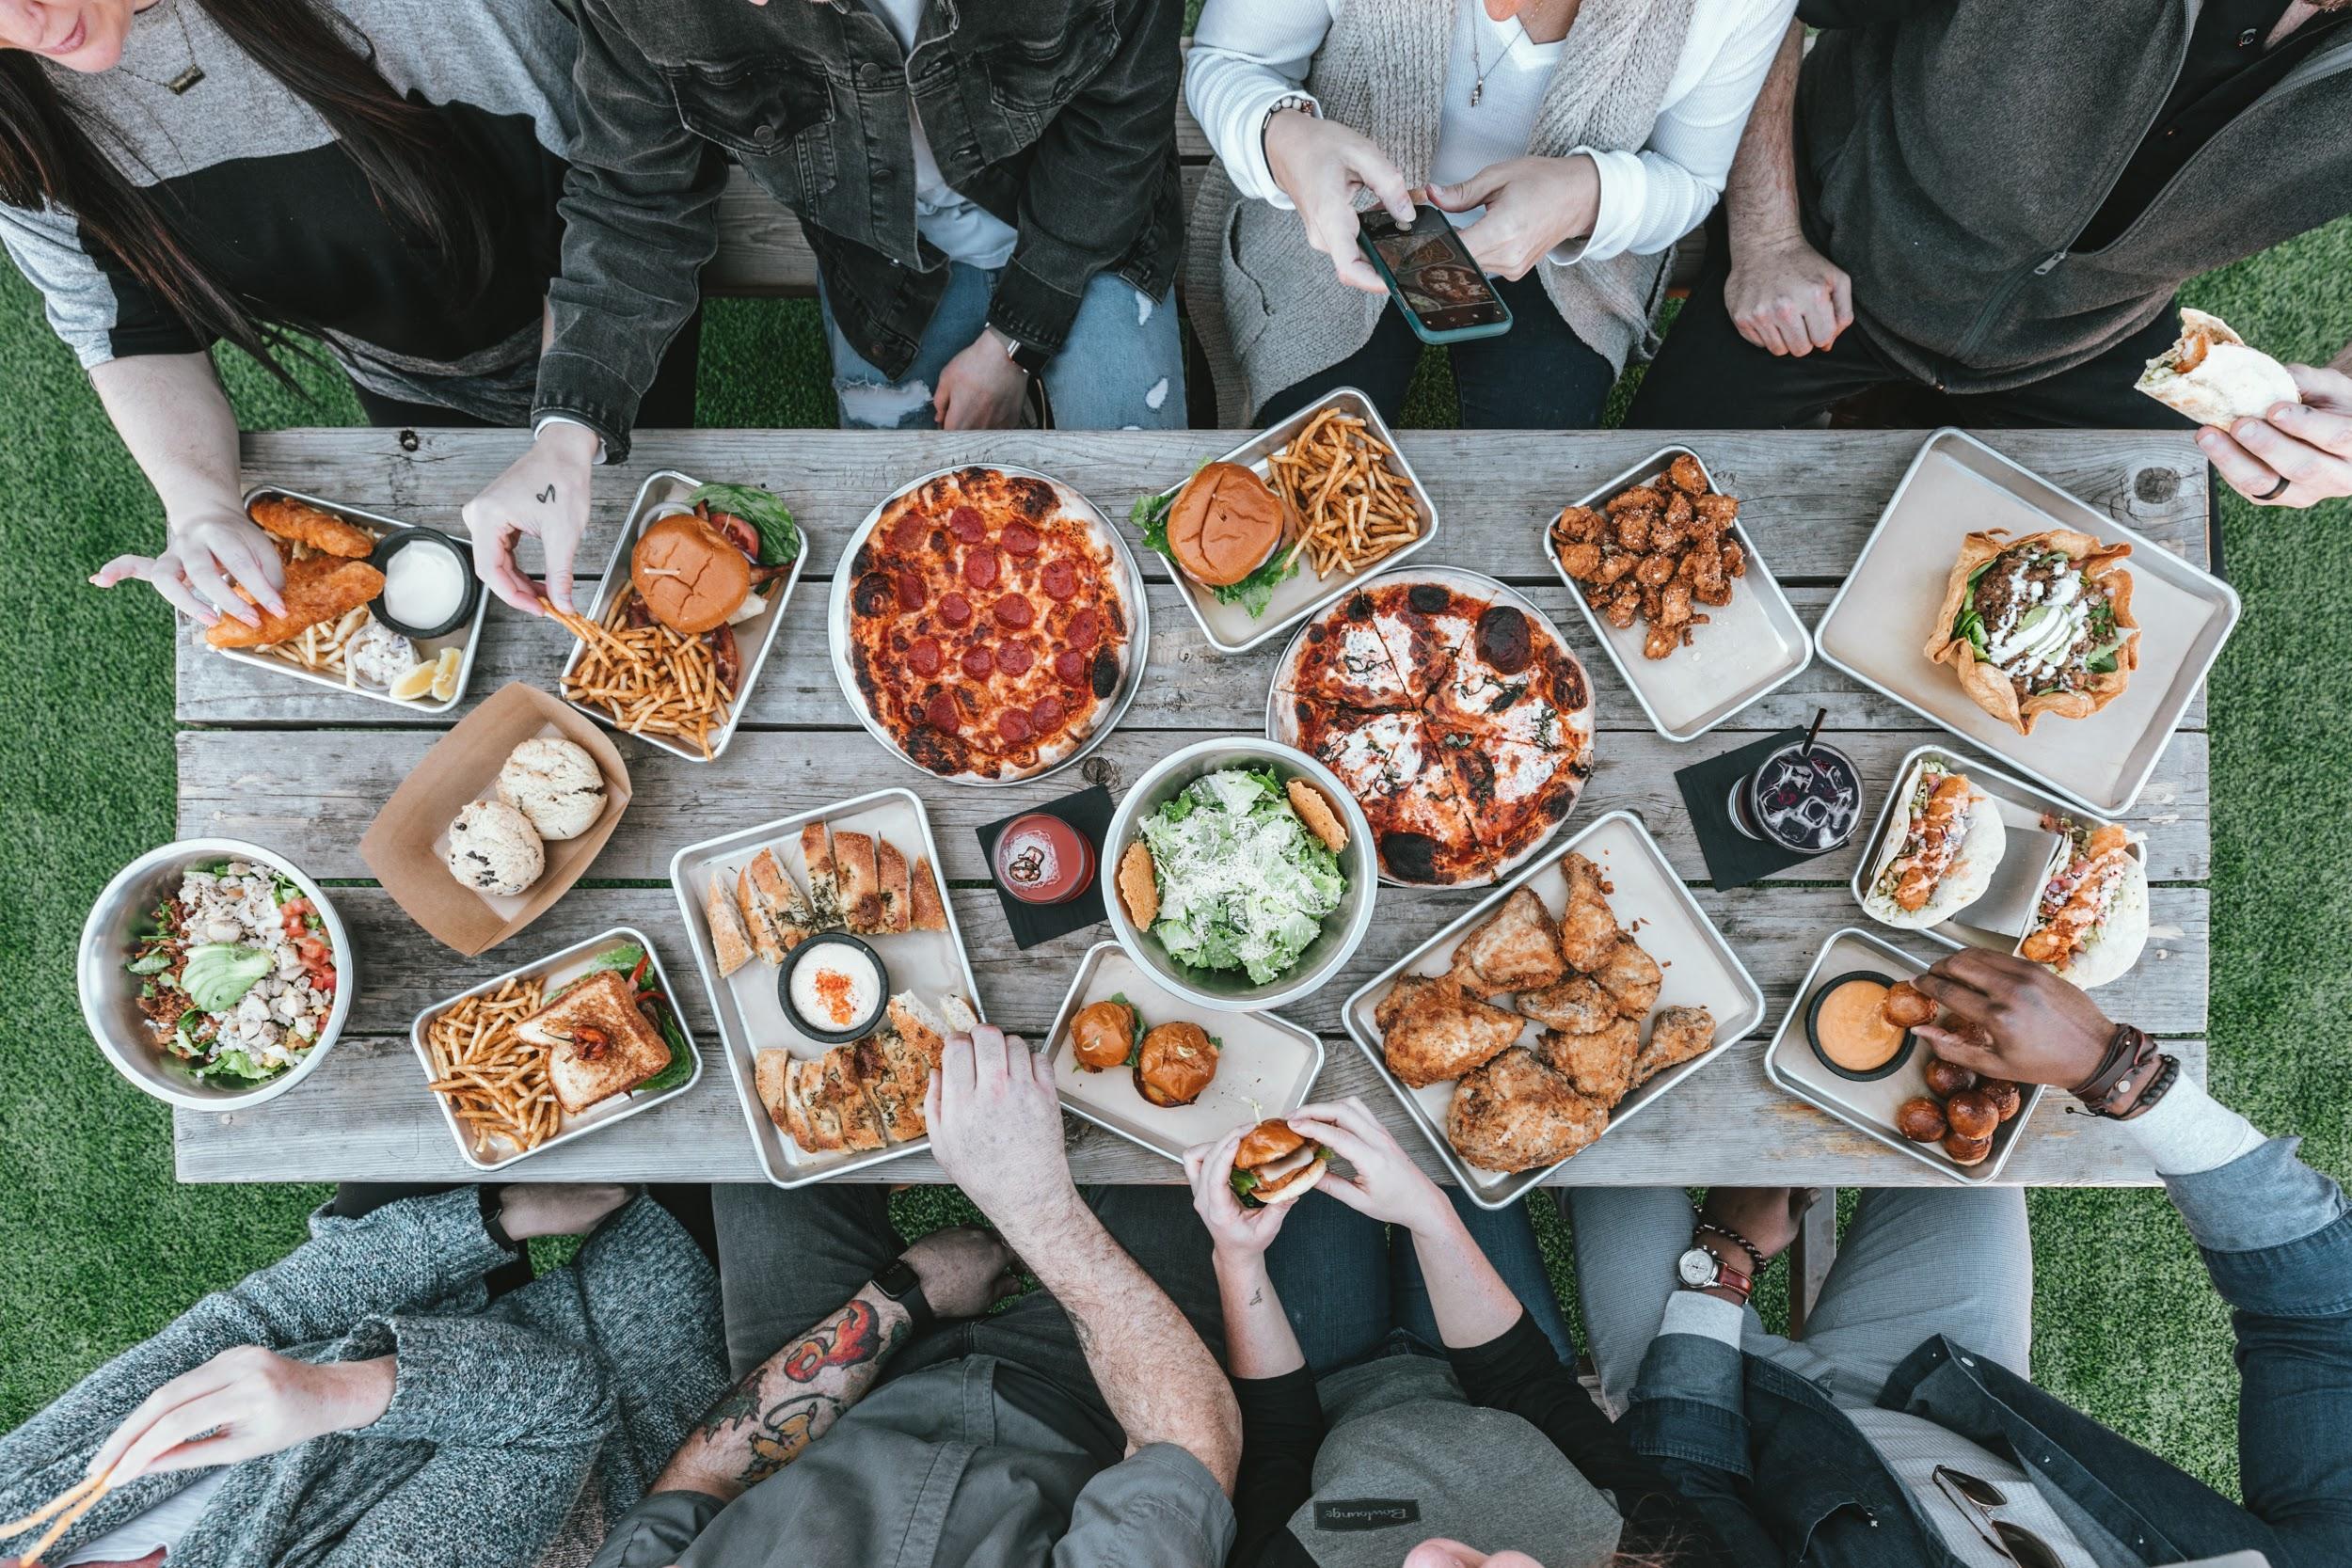 The photo shows a wooden picnic table surrounded by people (just arms and legs showing). On the table are trays holding a variety of foods, including pizza, salads, sandwiches, tacos, and chicken.